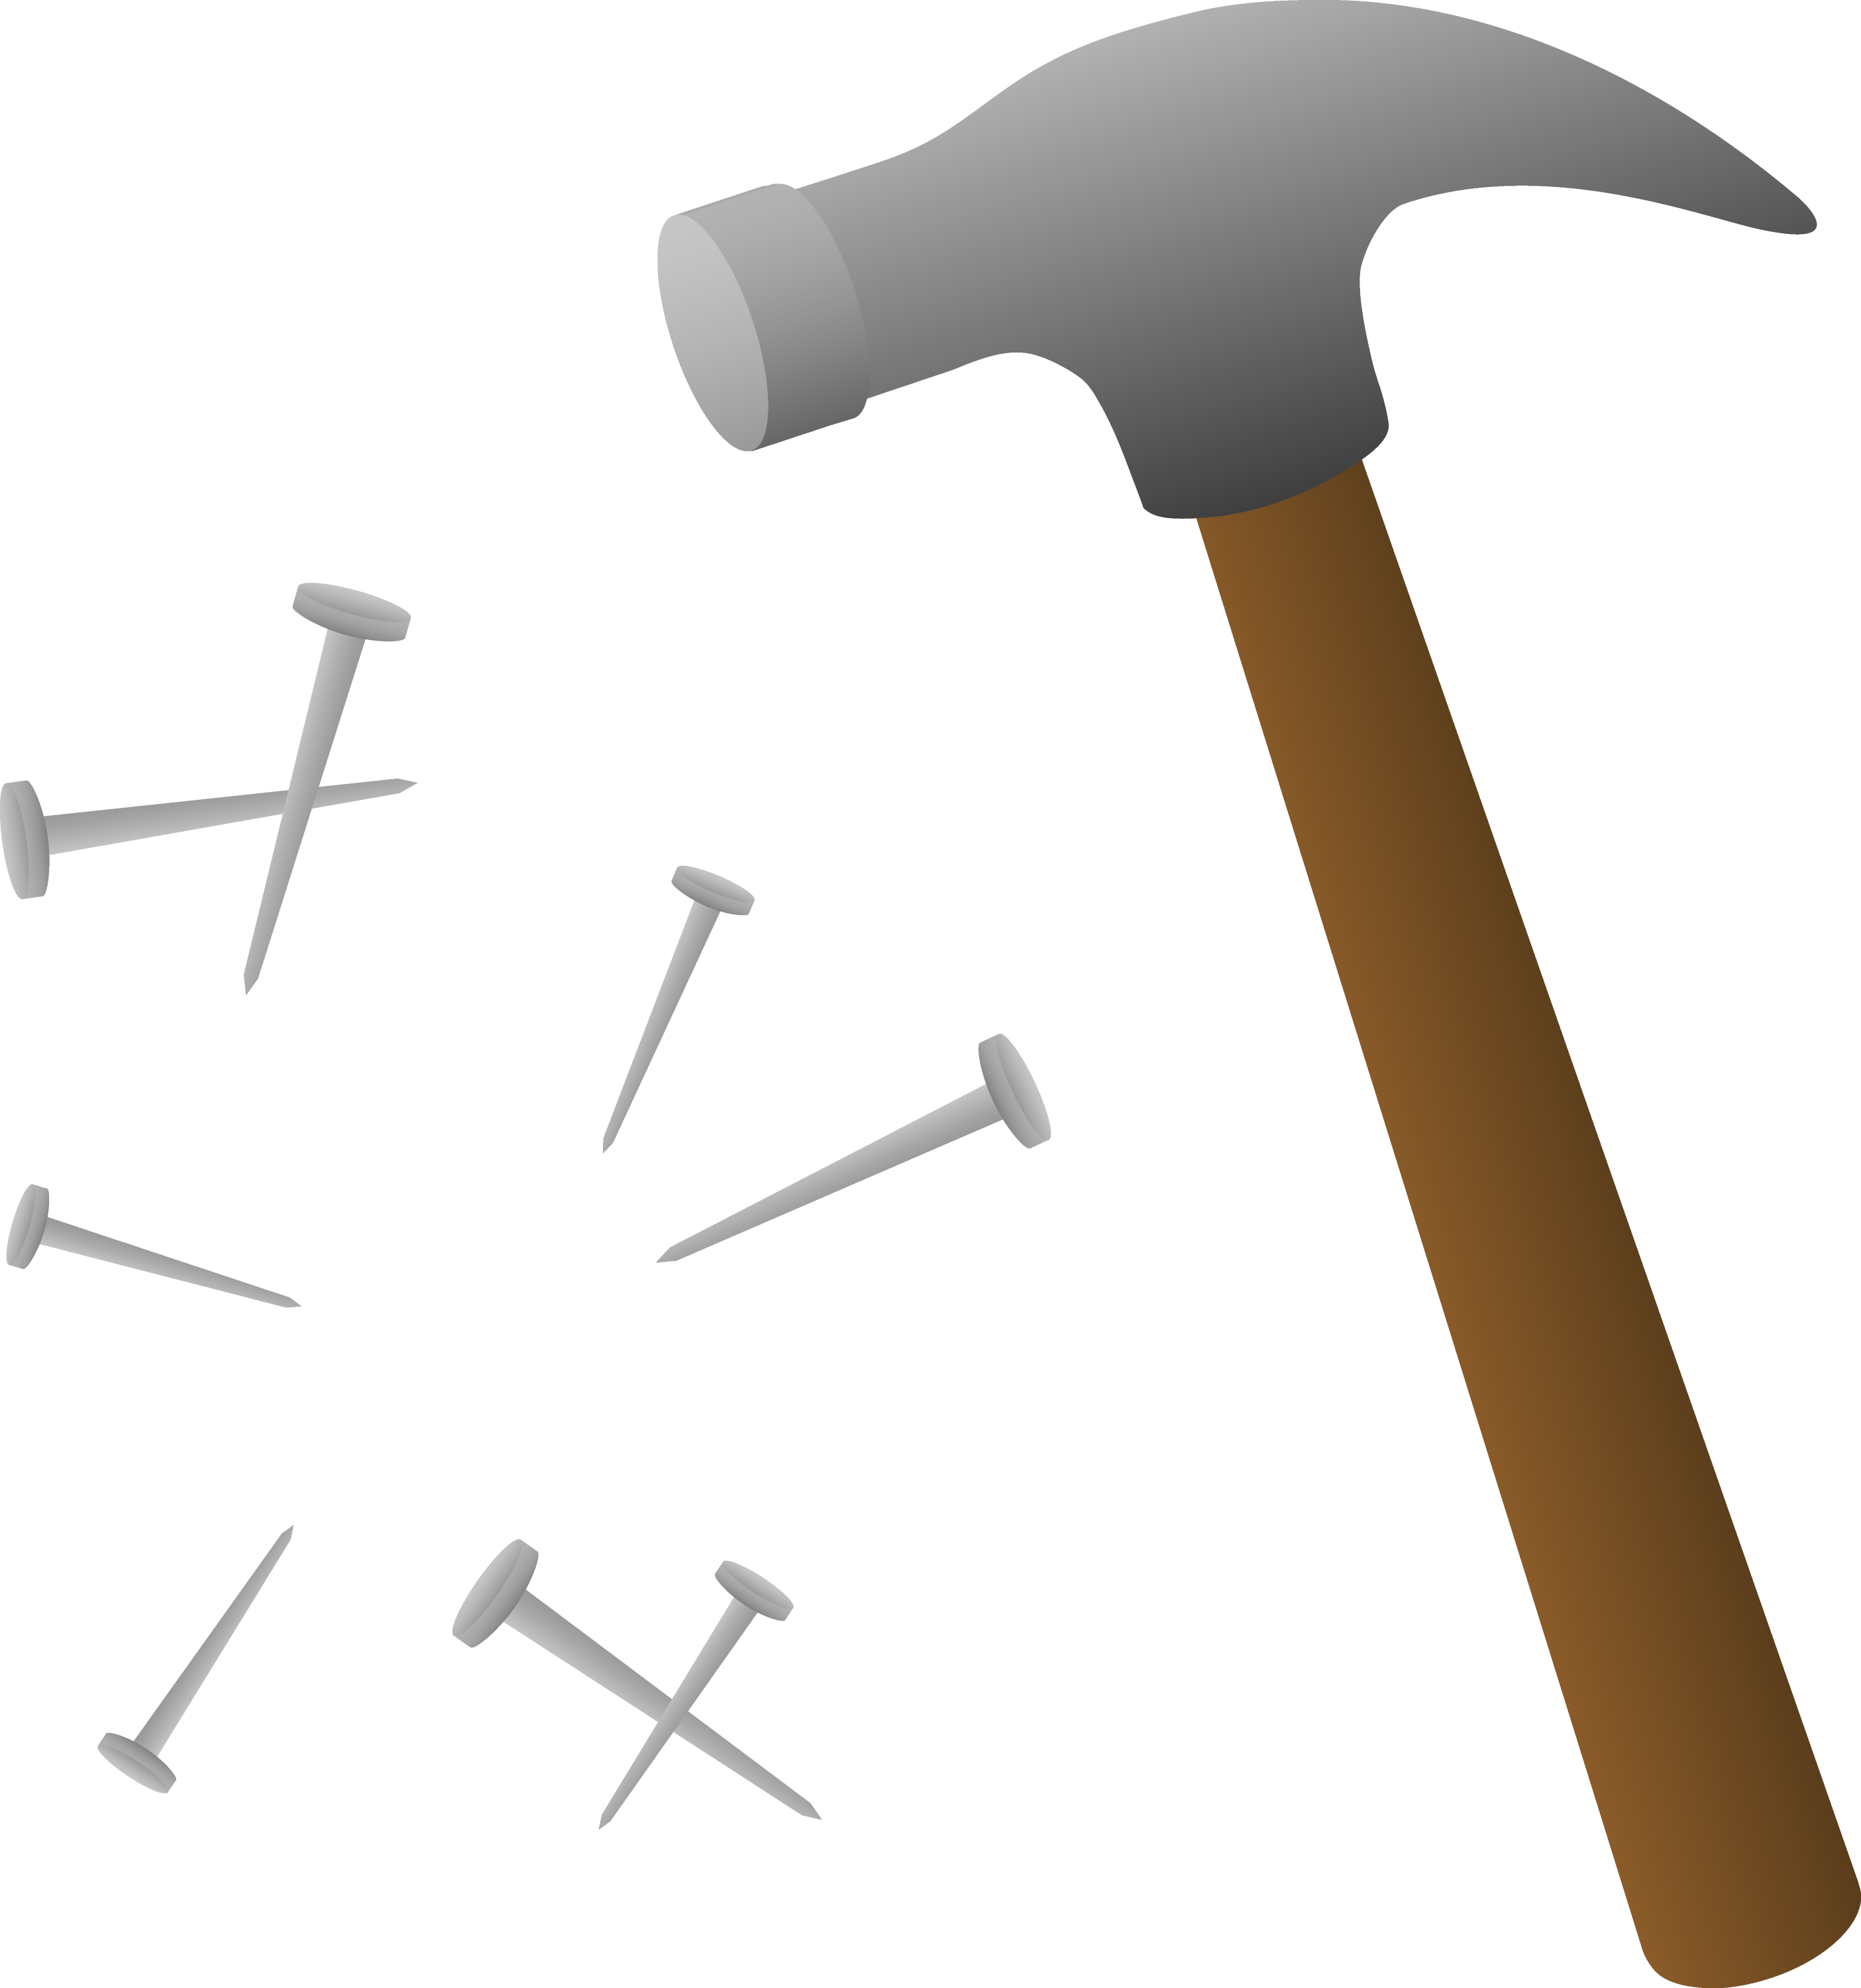 hammer and nails clipart - photo #1